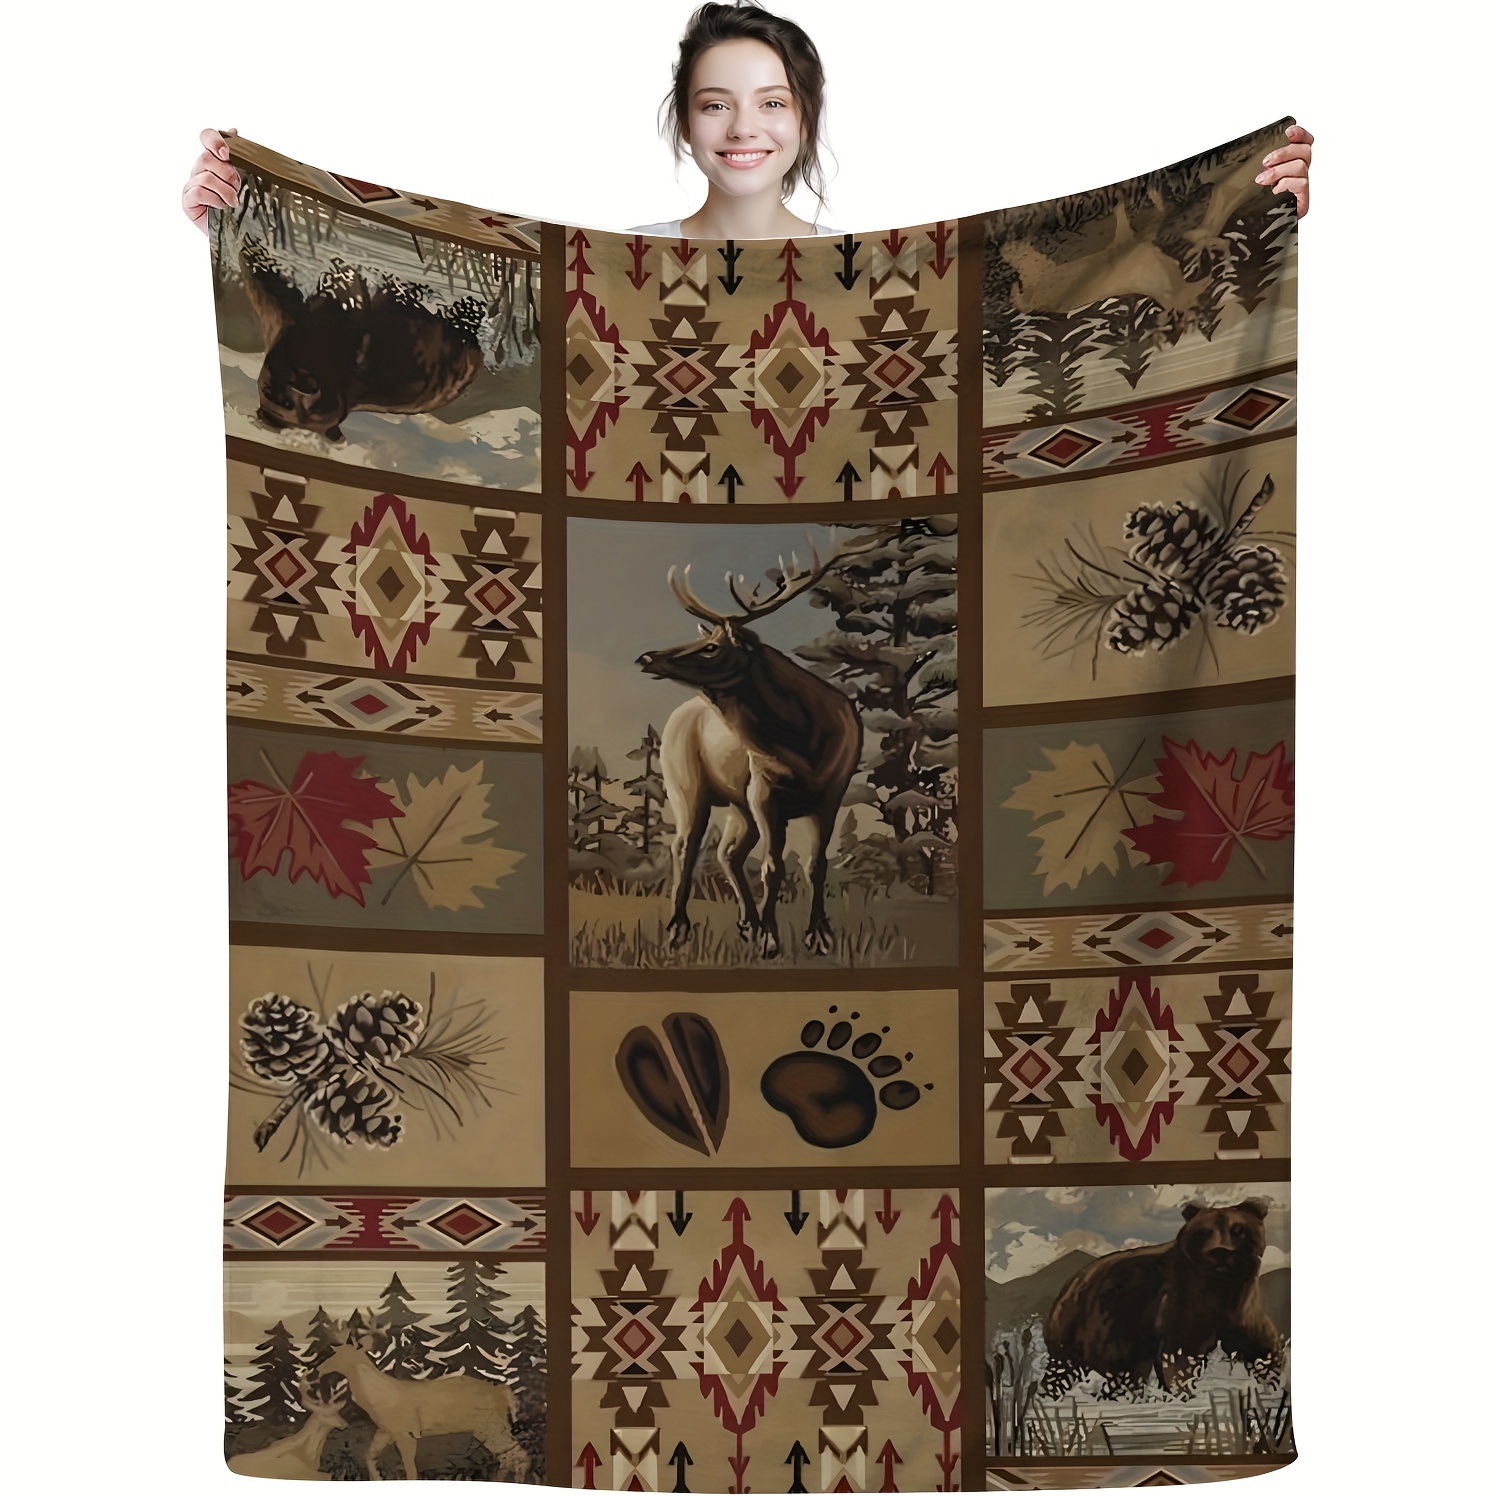 

Style Knitted Polyester Throw Blanket With Wilderness Wildlife Pattern, Soft Flannel Fleece, Animal Theme, All-season Comfort – Rustic Elk, Bear, Pinecone Design For Wildlife Enthusiasts